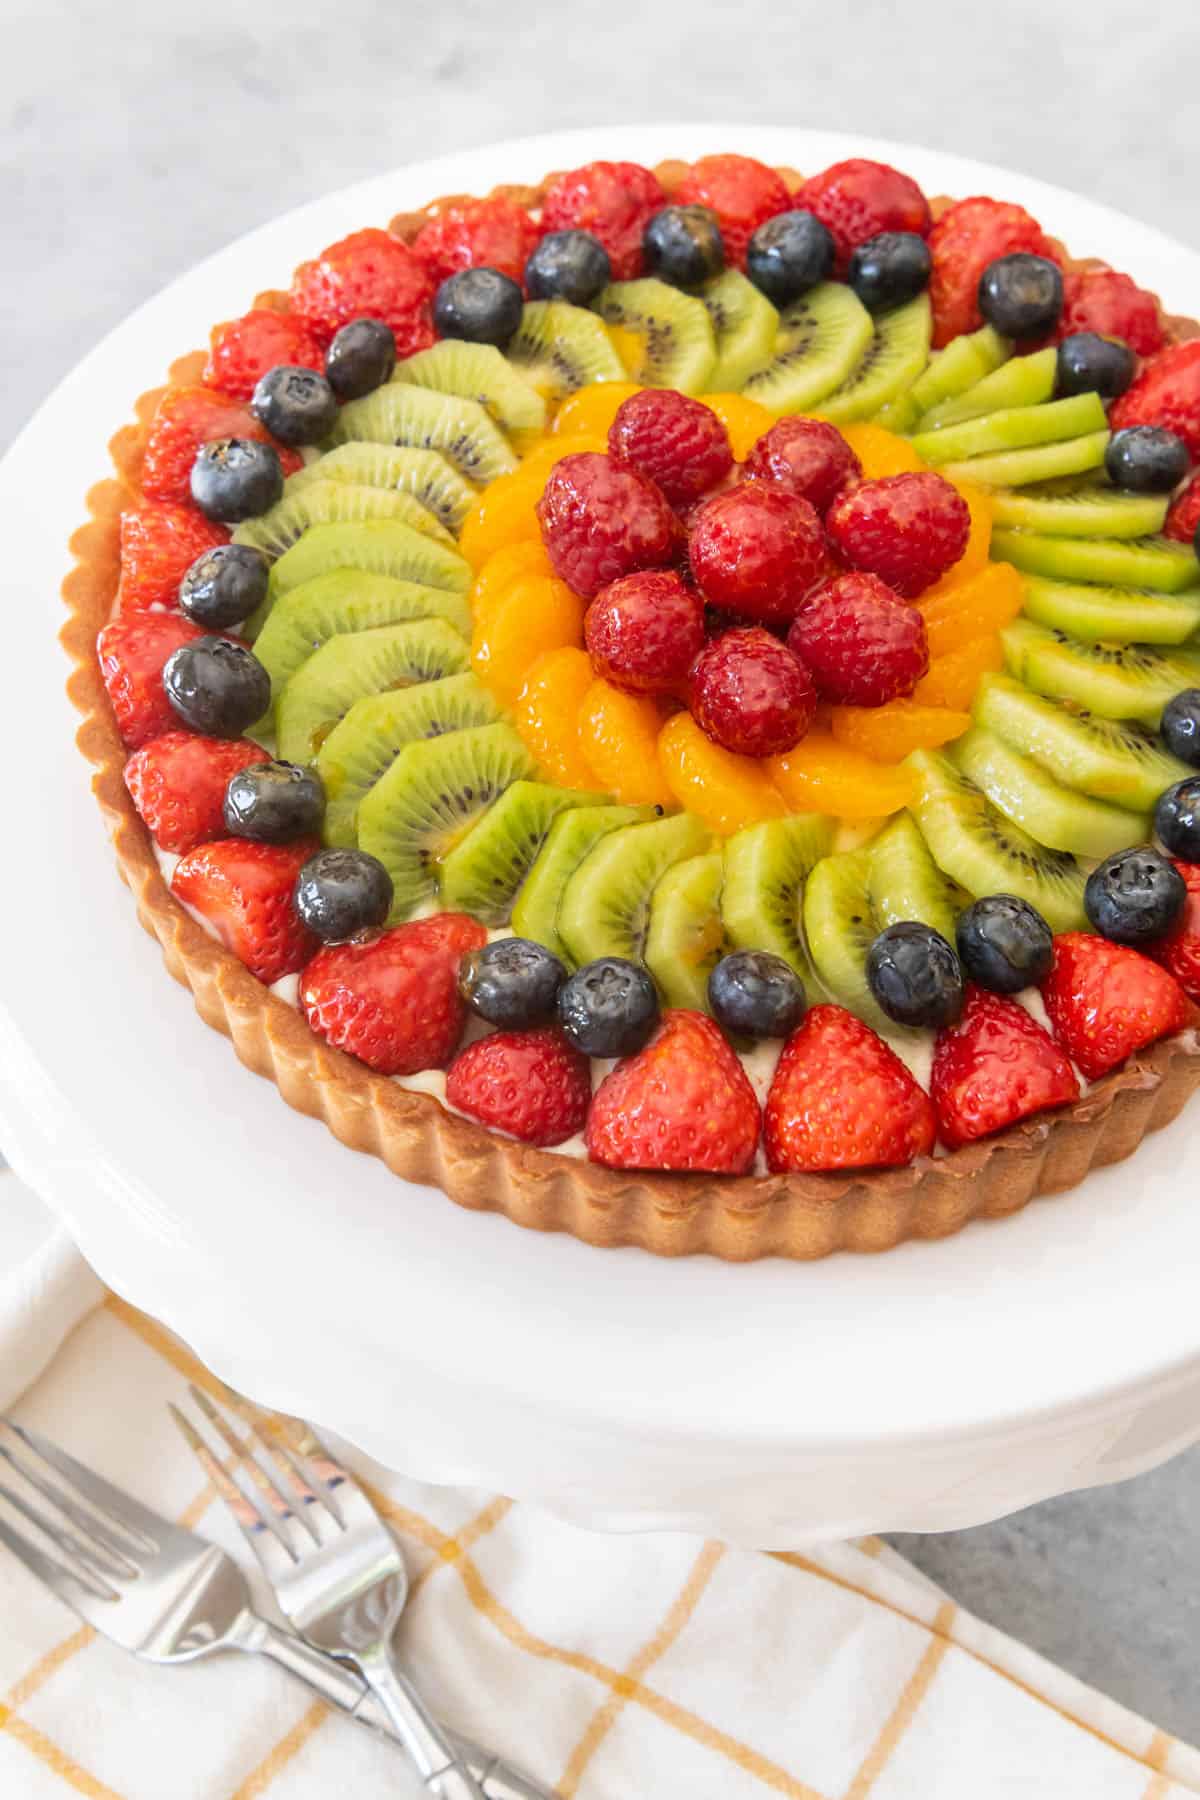 An image of a tart made with mixed fruit in concentric circles, made with a French fruit tart recipe.